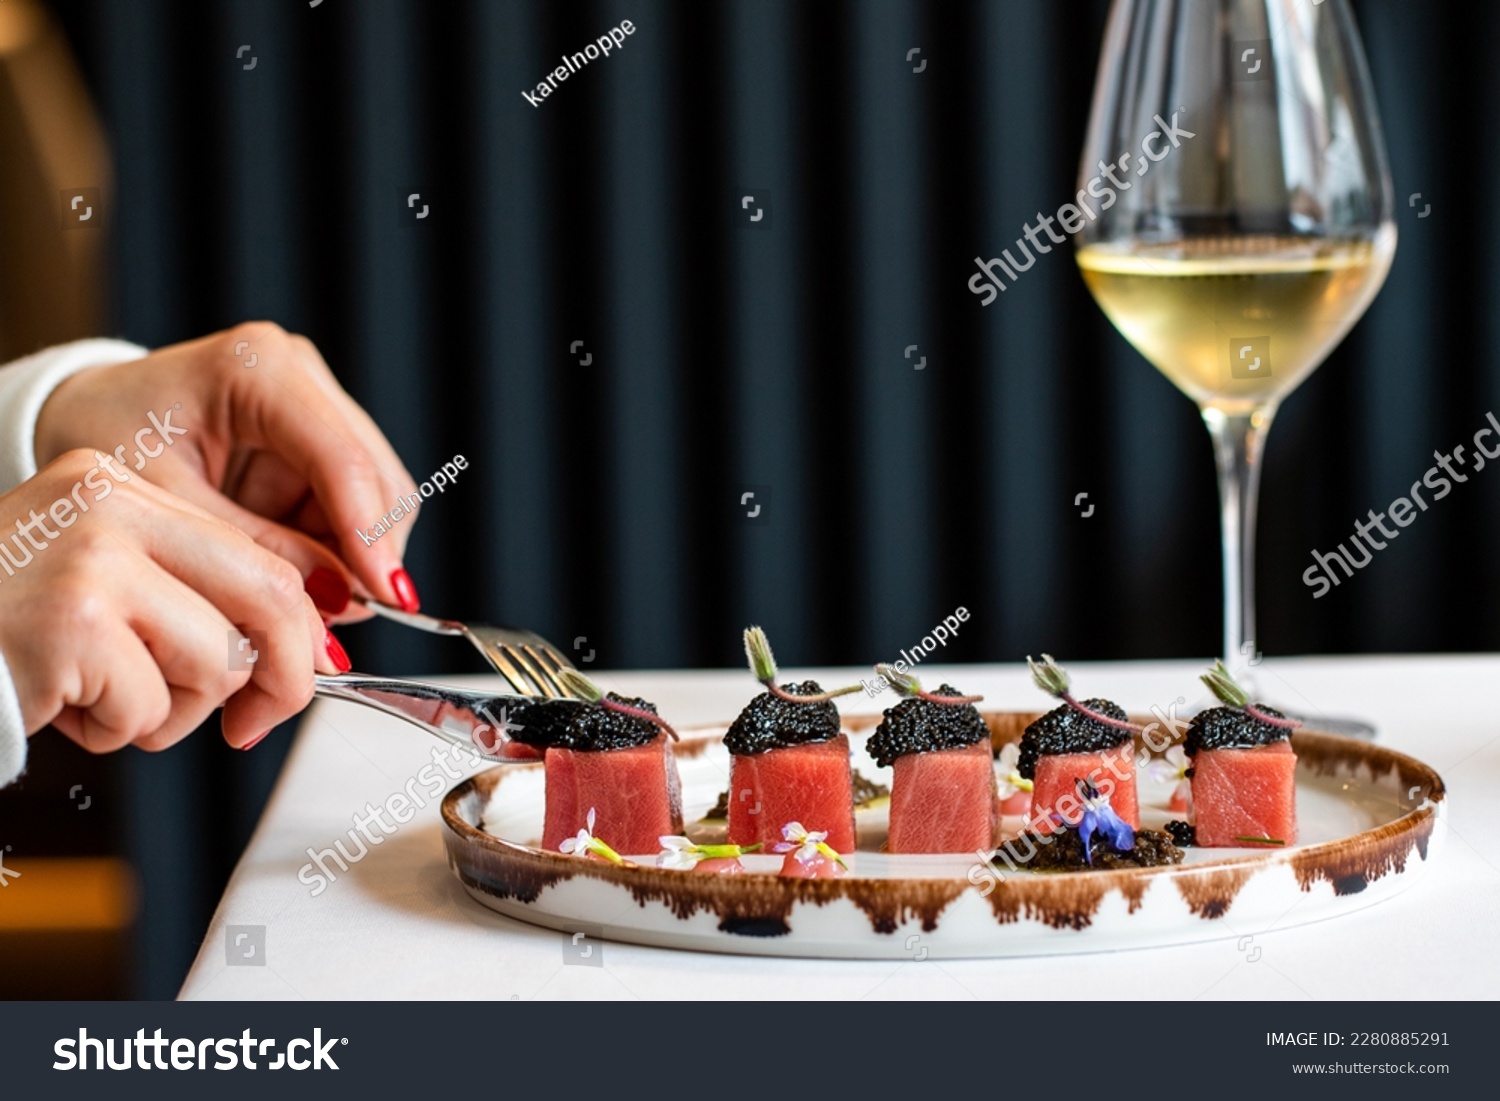 Close up detail of female having dinner in top notch restaurant. Side view of female hands next to blue fin tuna dish with beluga caviar and a glass of white wine. #2280885291